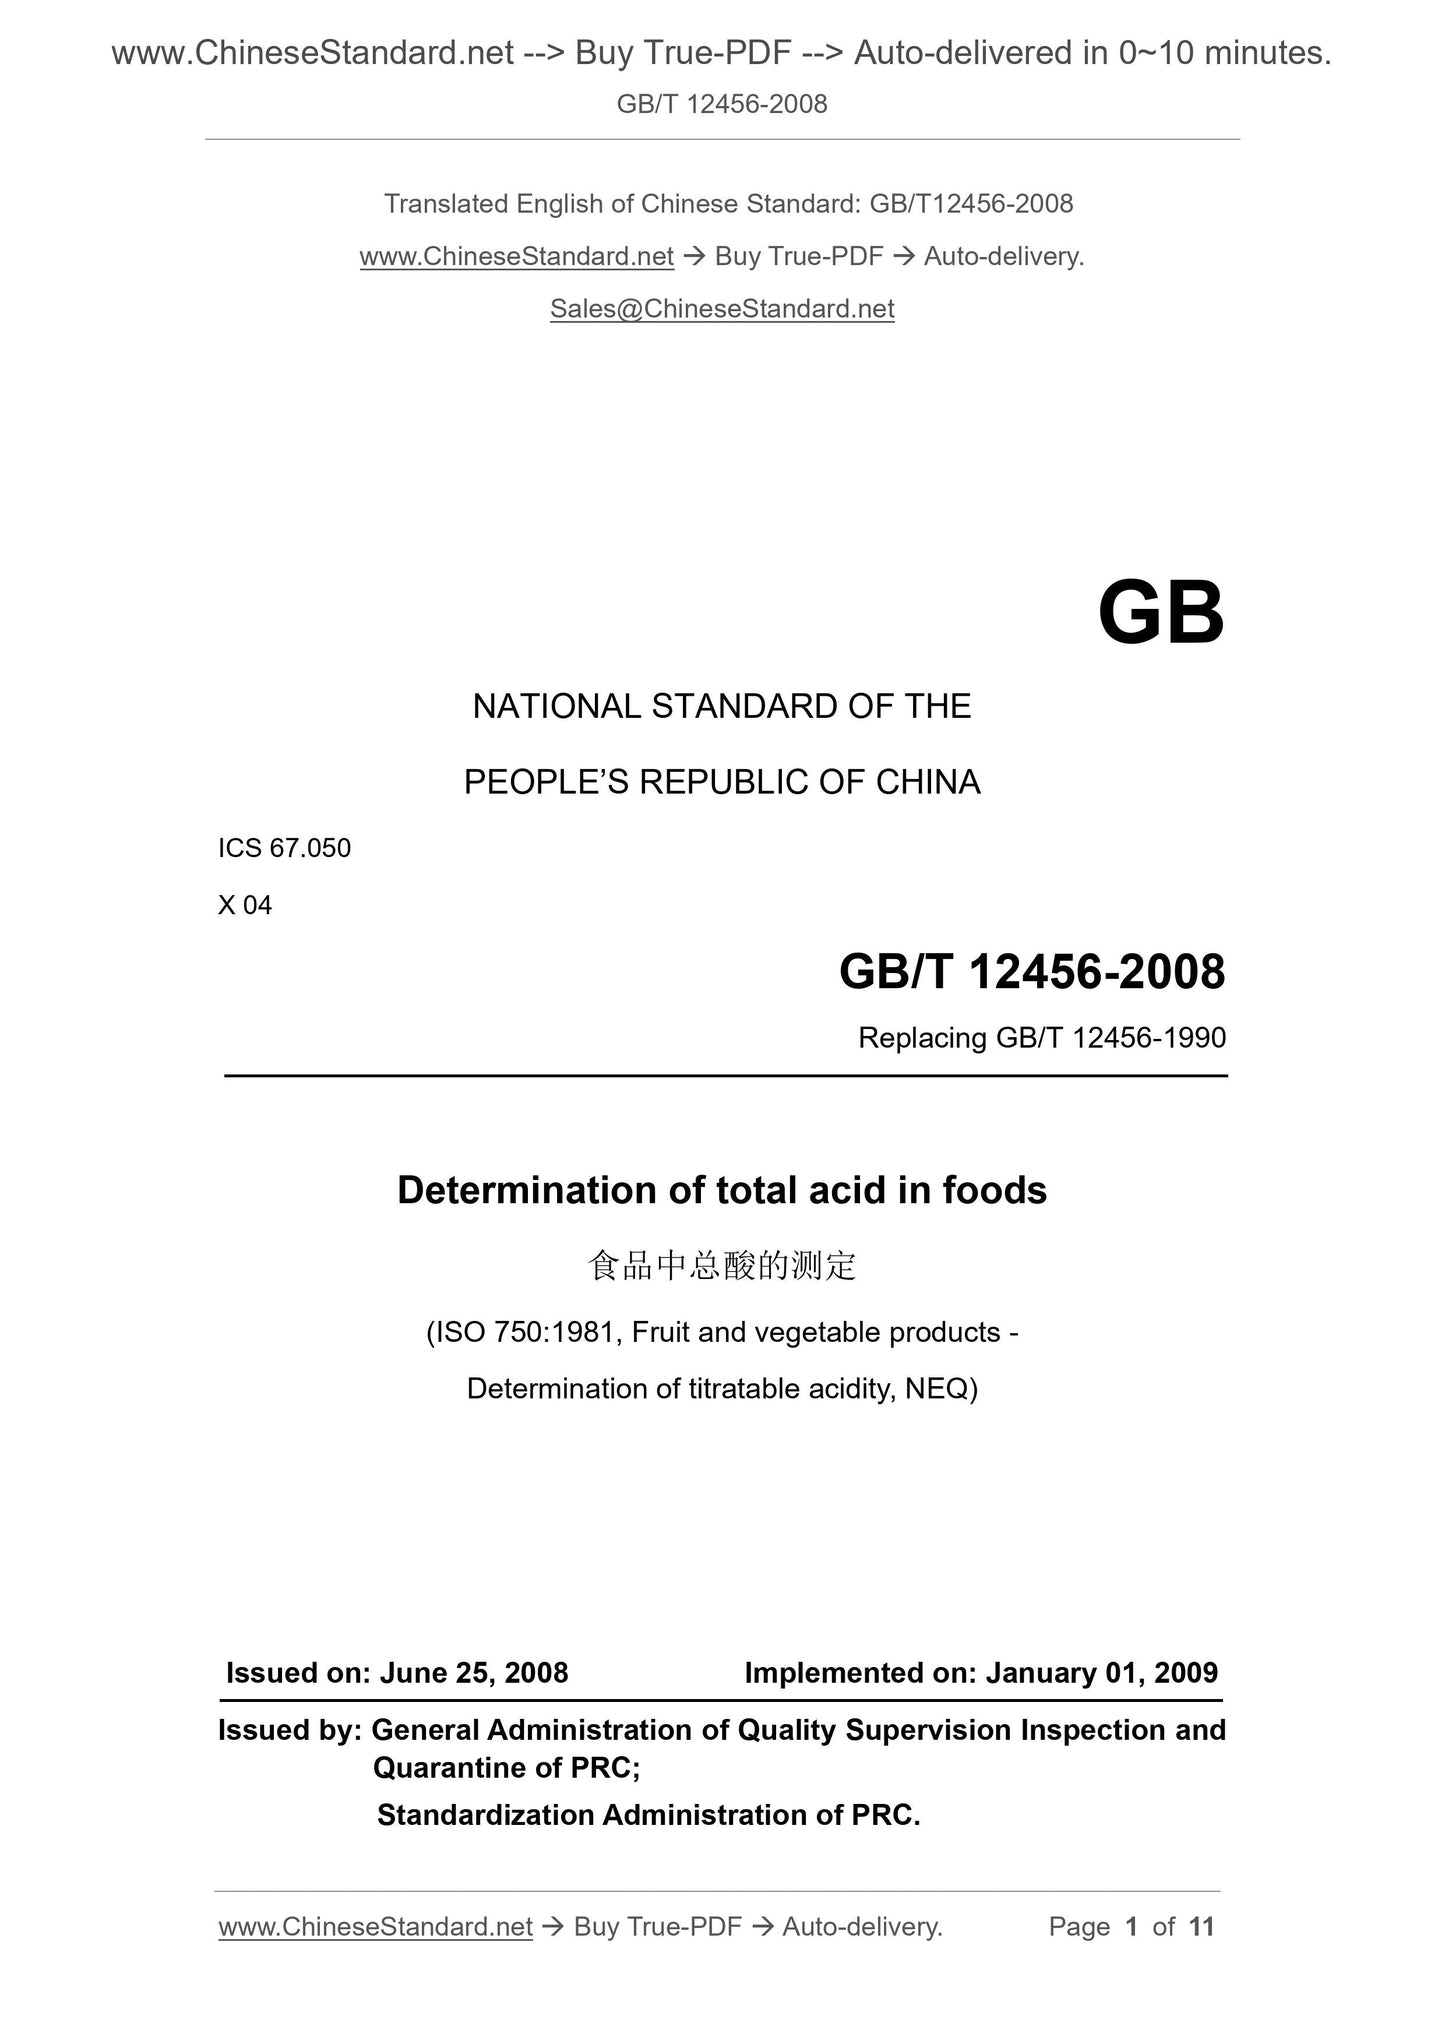 GB/T 12456-2008 Page 1